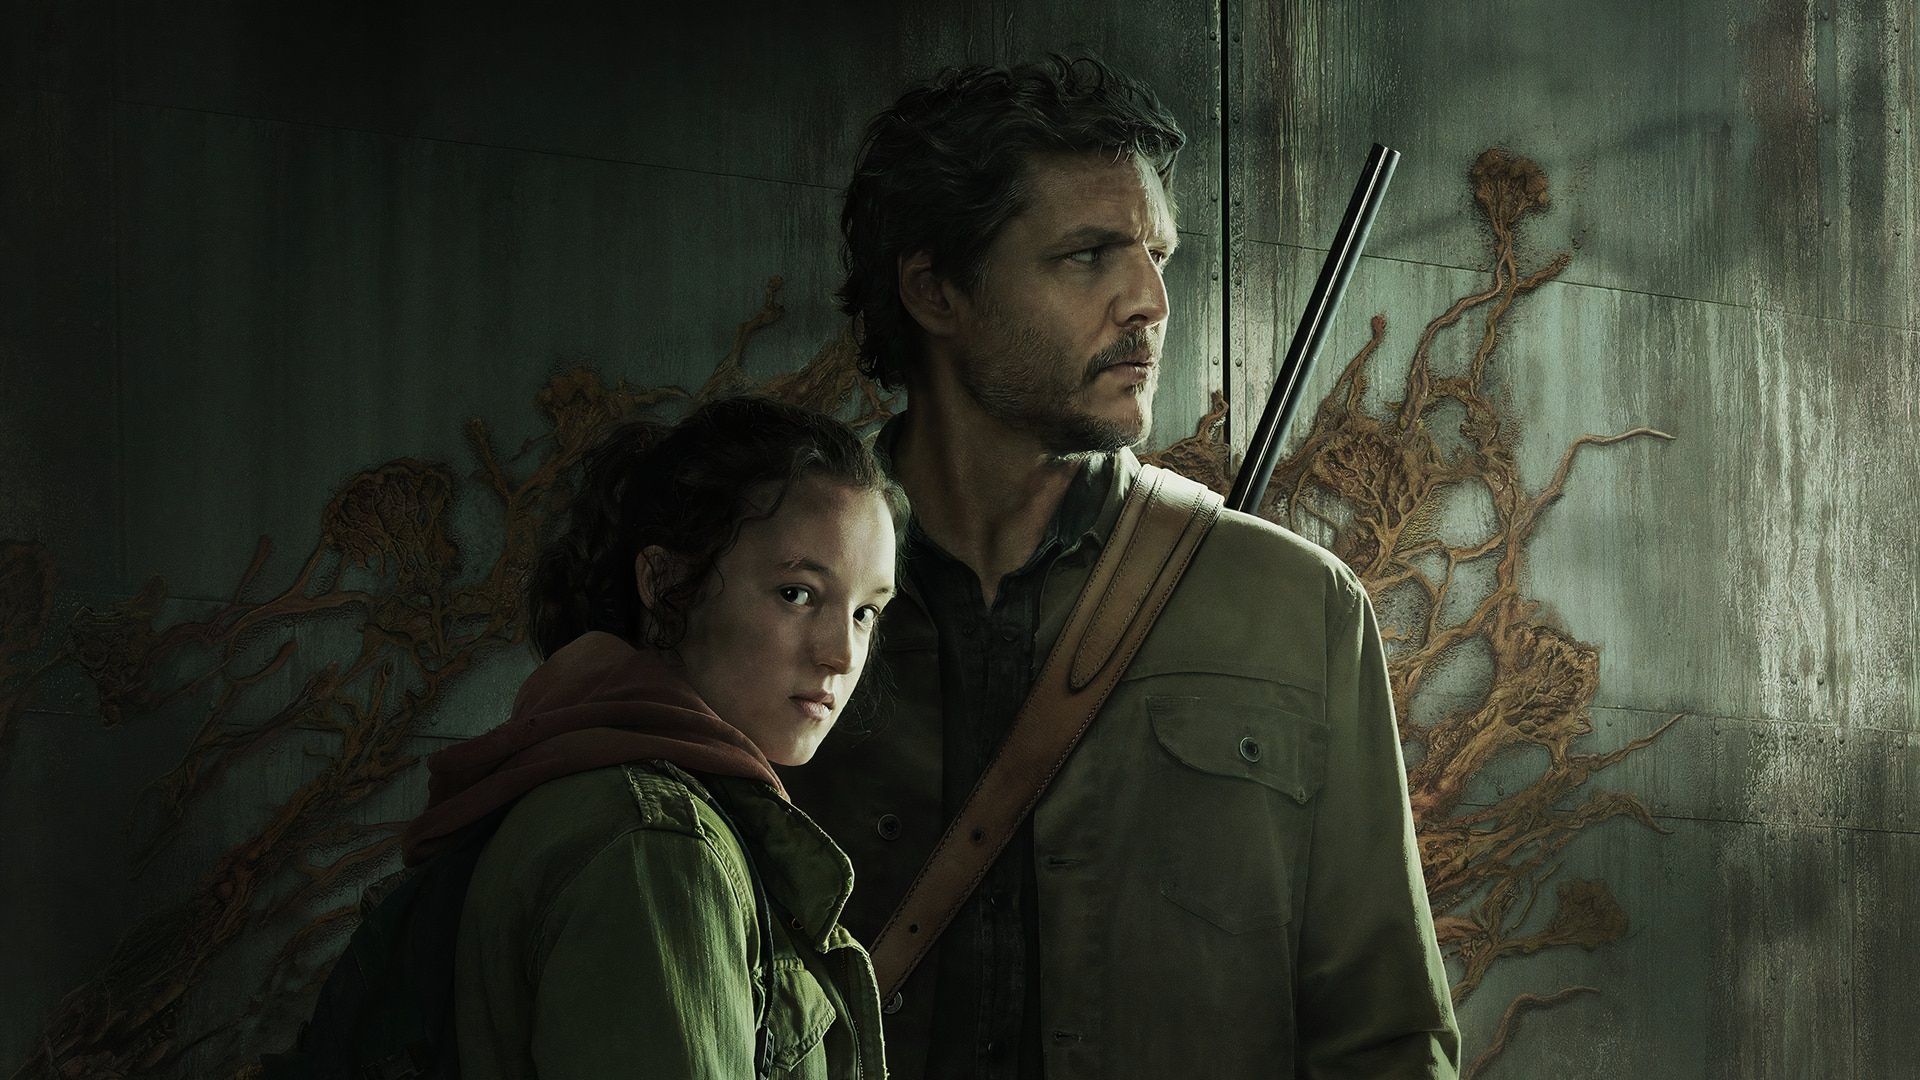 Pedro Pascal and Bella Ramsay in HBO's The Last of Us